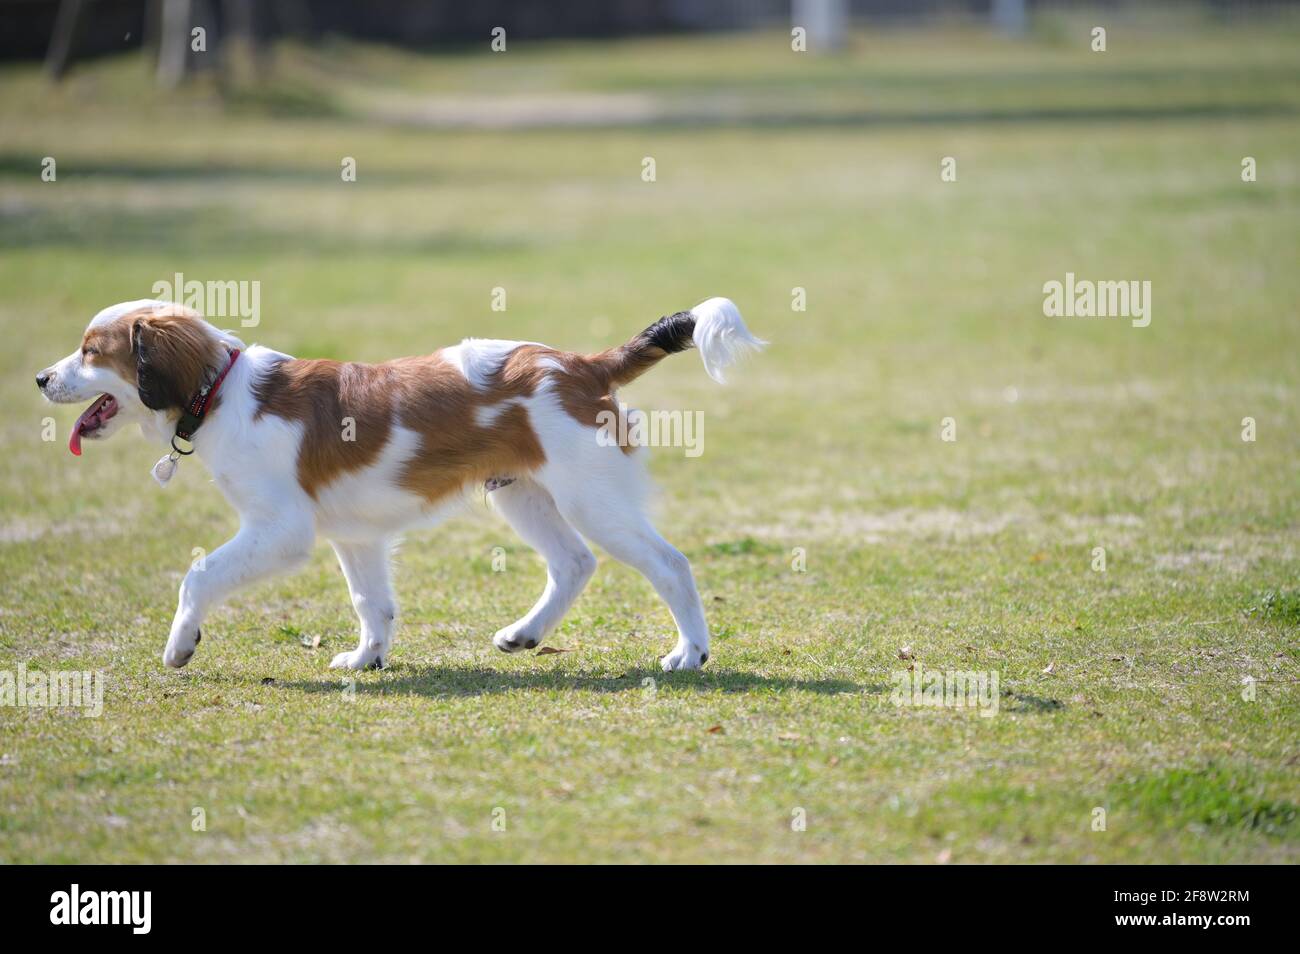 Young dog kookier walking on the grass. Exiting the frame. Stock Photo